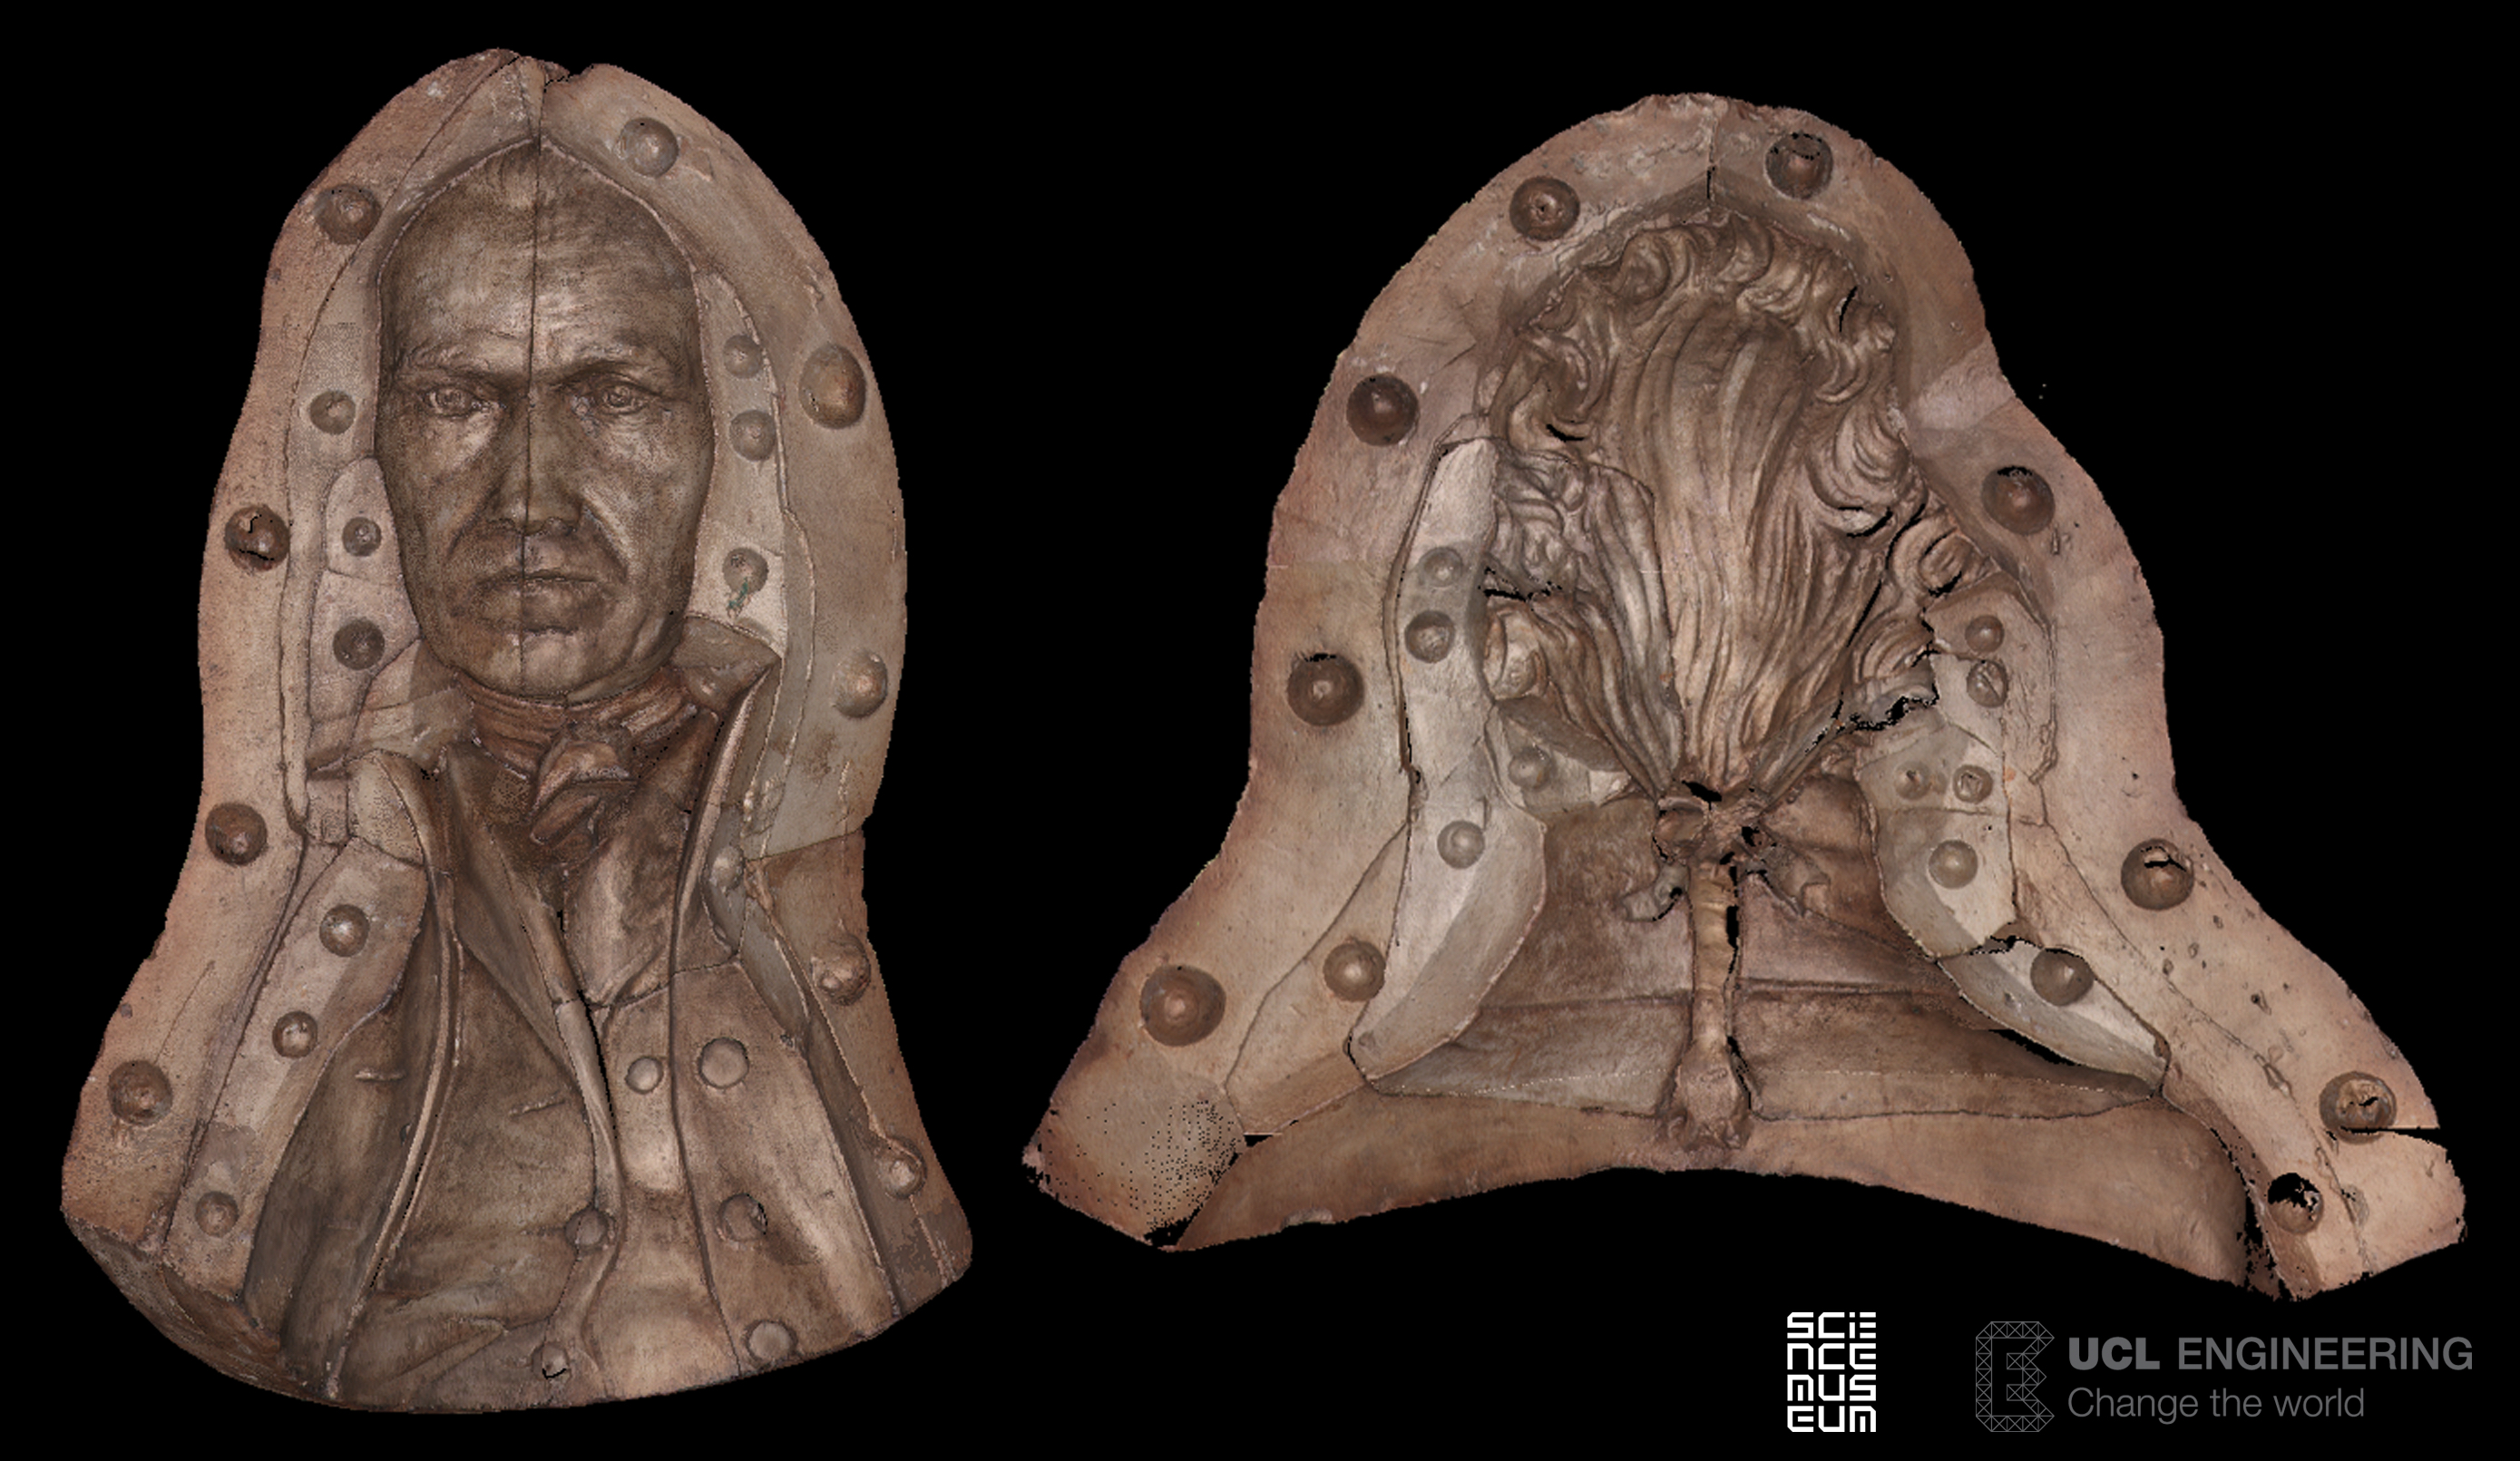 Image: 3D coloured scan of the object, the negative cast form